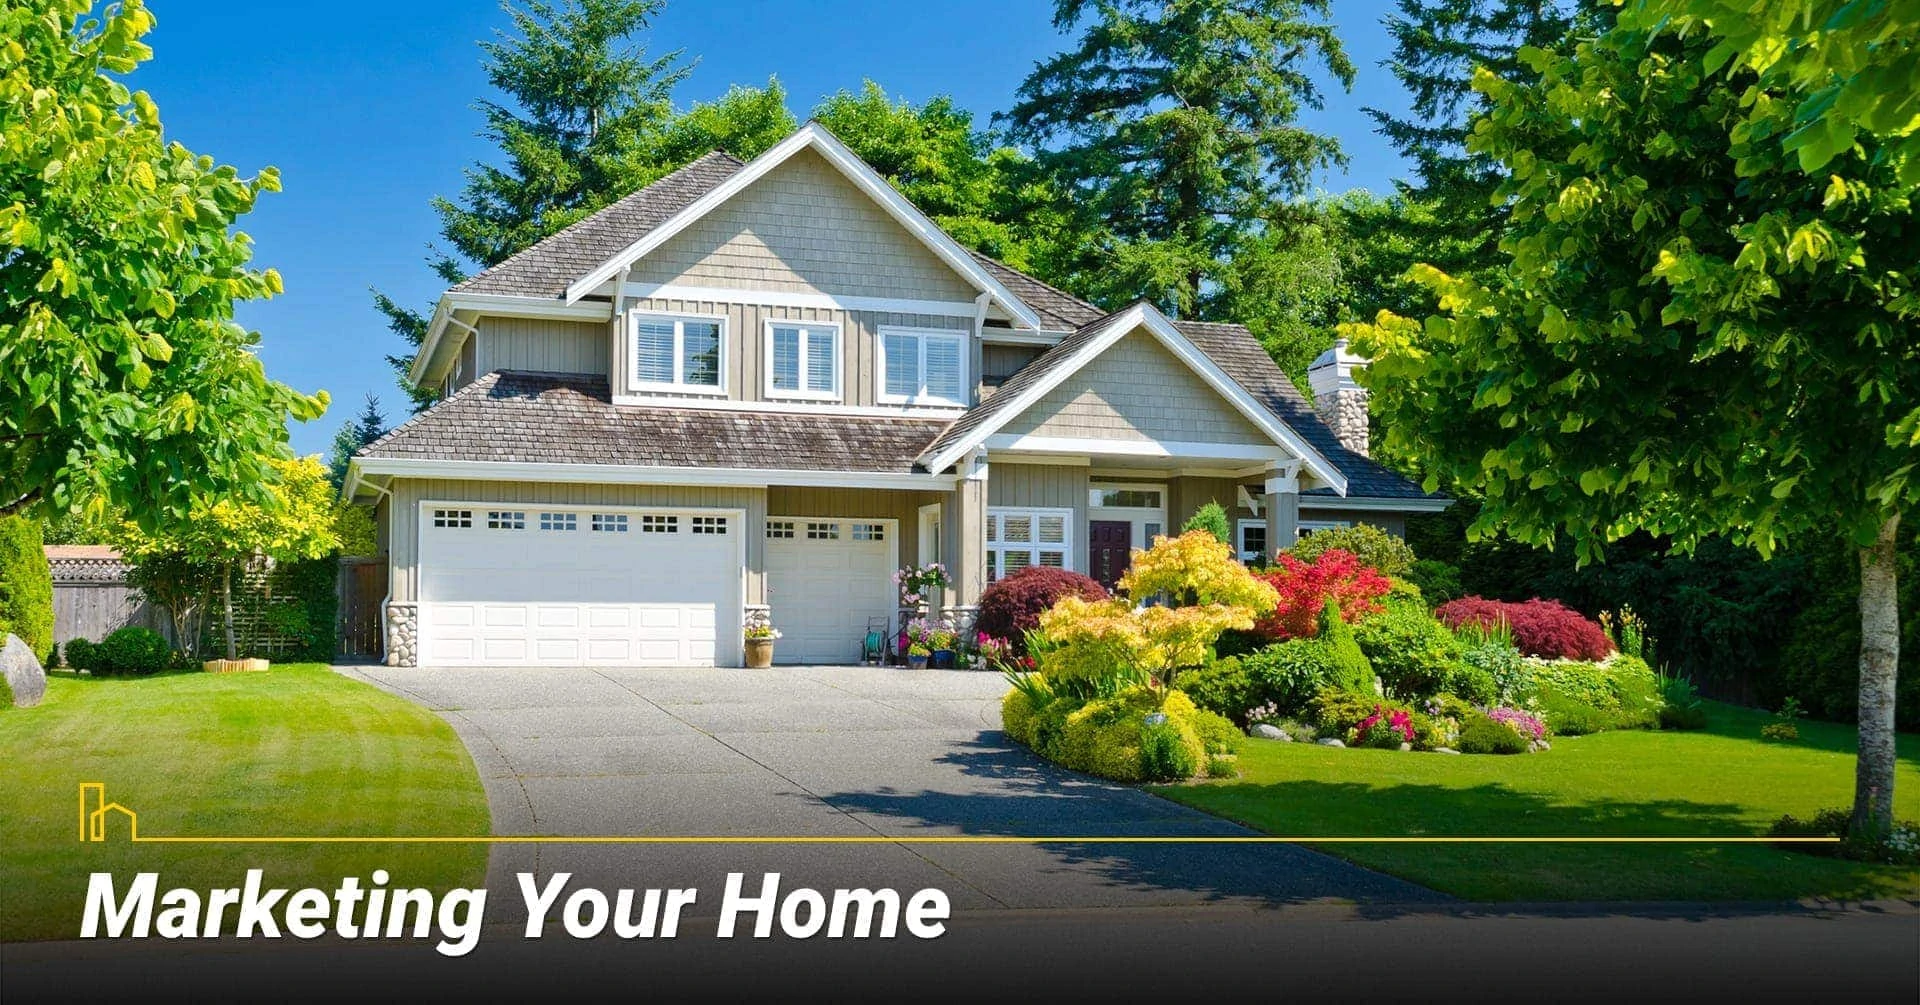 Marketing Your Home, list your home for sale